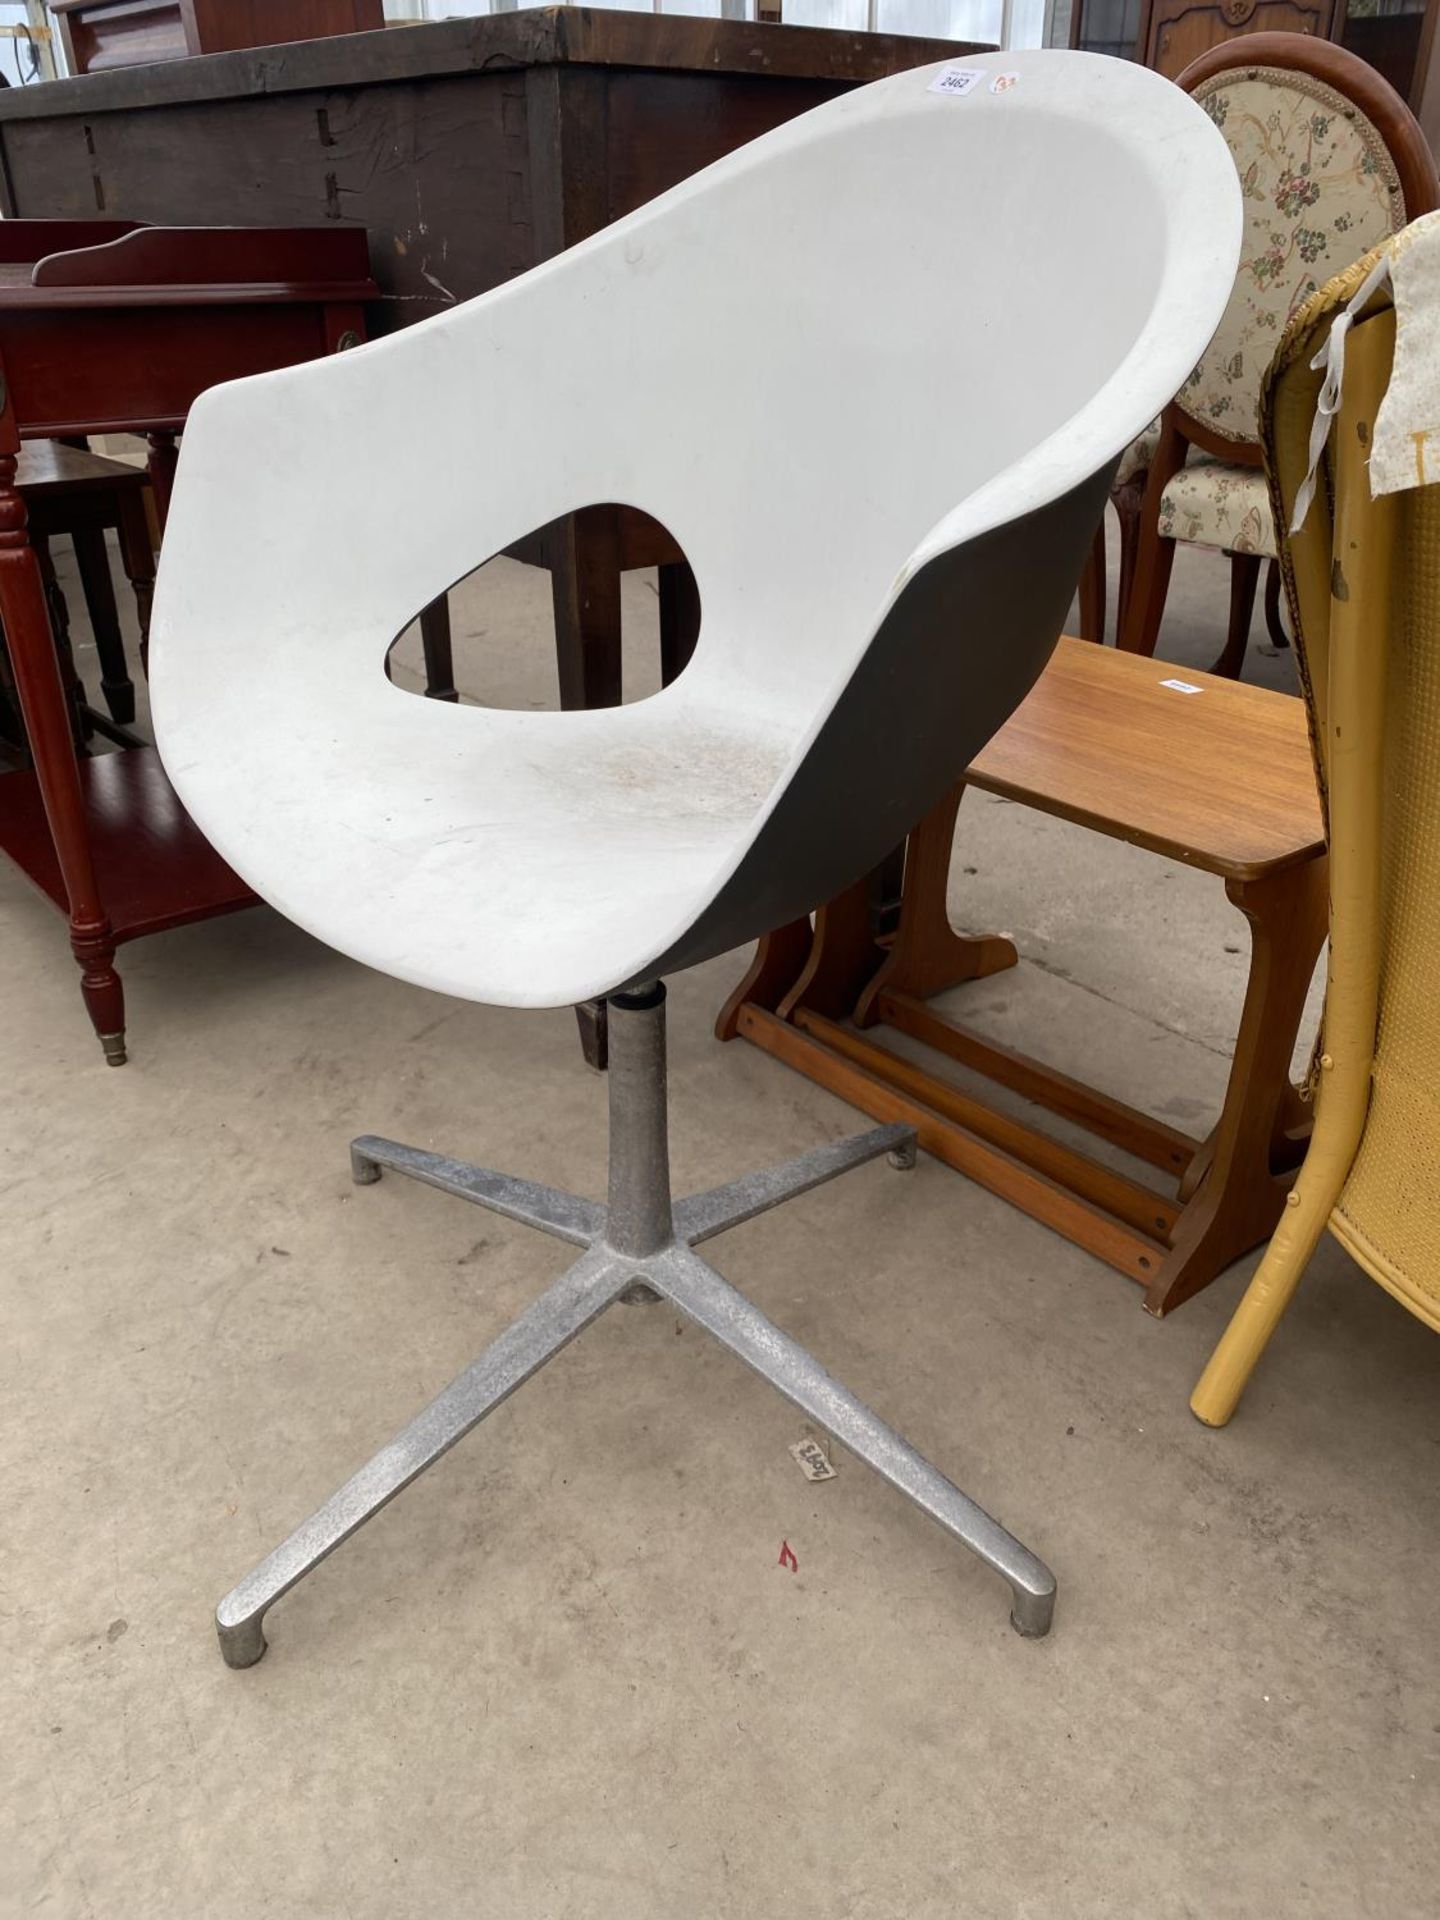 A 'CONNECTION' TWO TONE MODERNIST CHAIR ON ALLOY STAND - Image 2 of 2